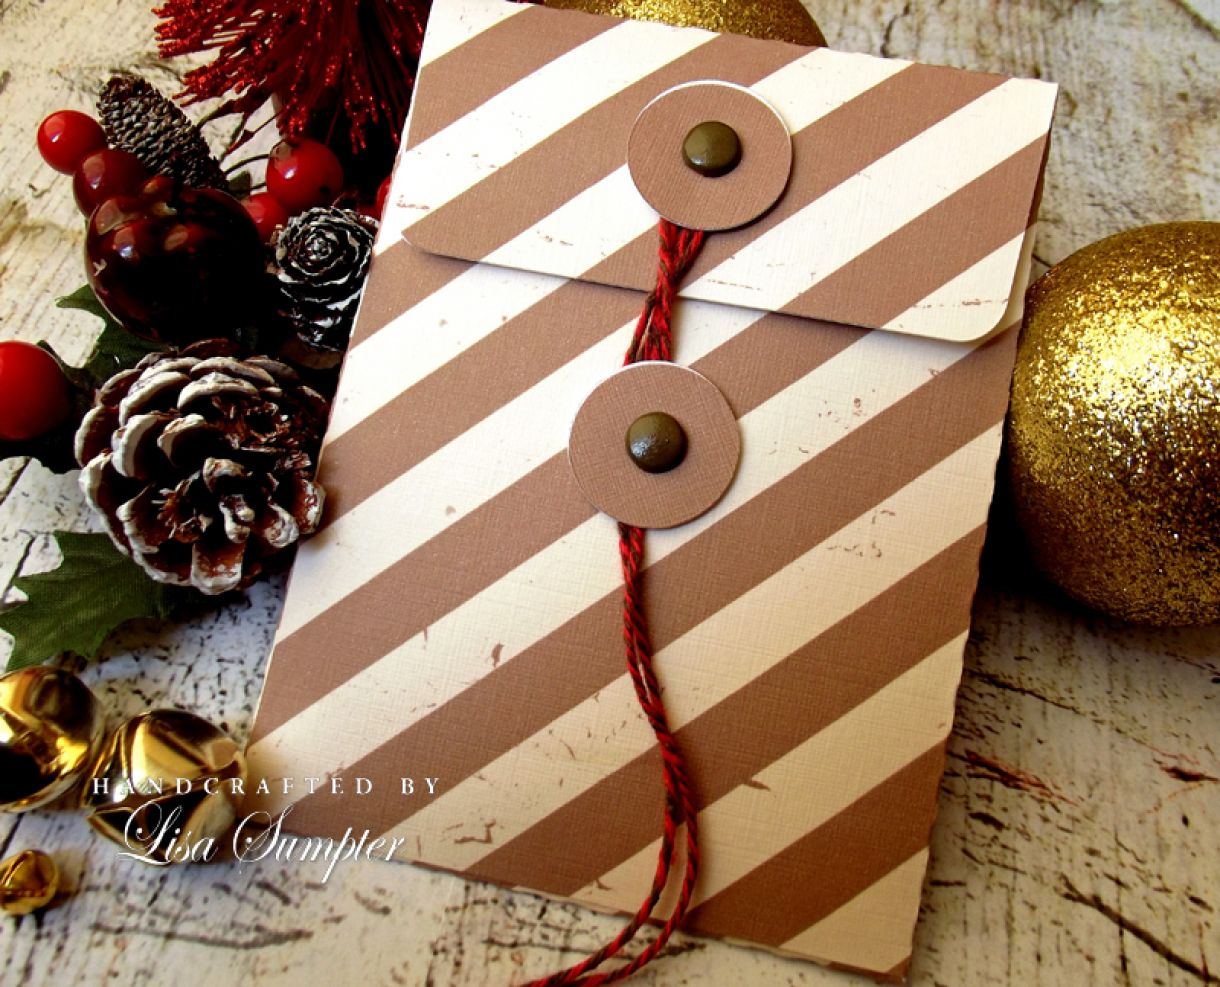 Lisa  Sumpter For  Papermill  Direct  Small  Gift  Wrapping  Ideas 4